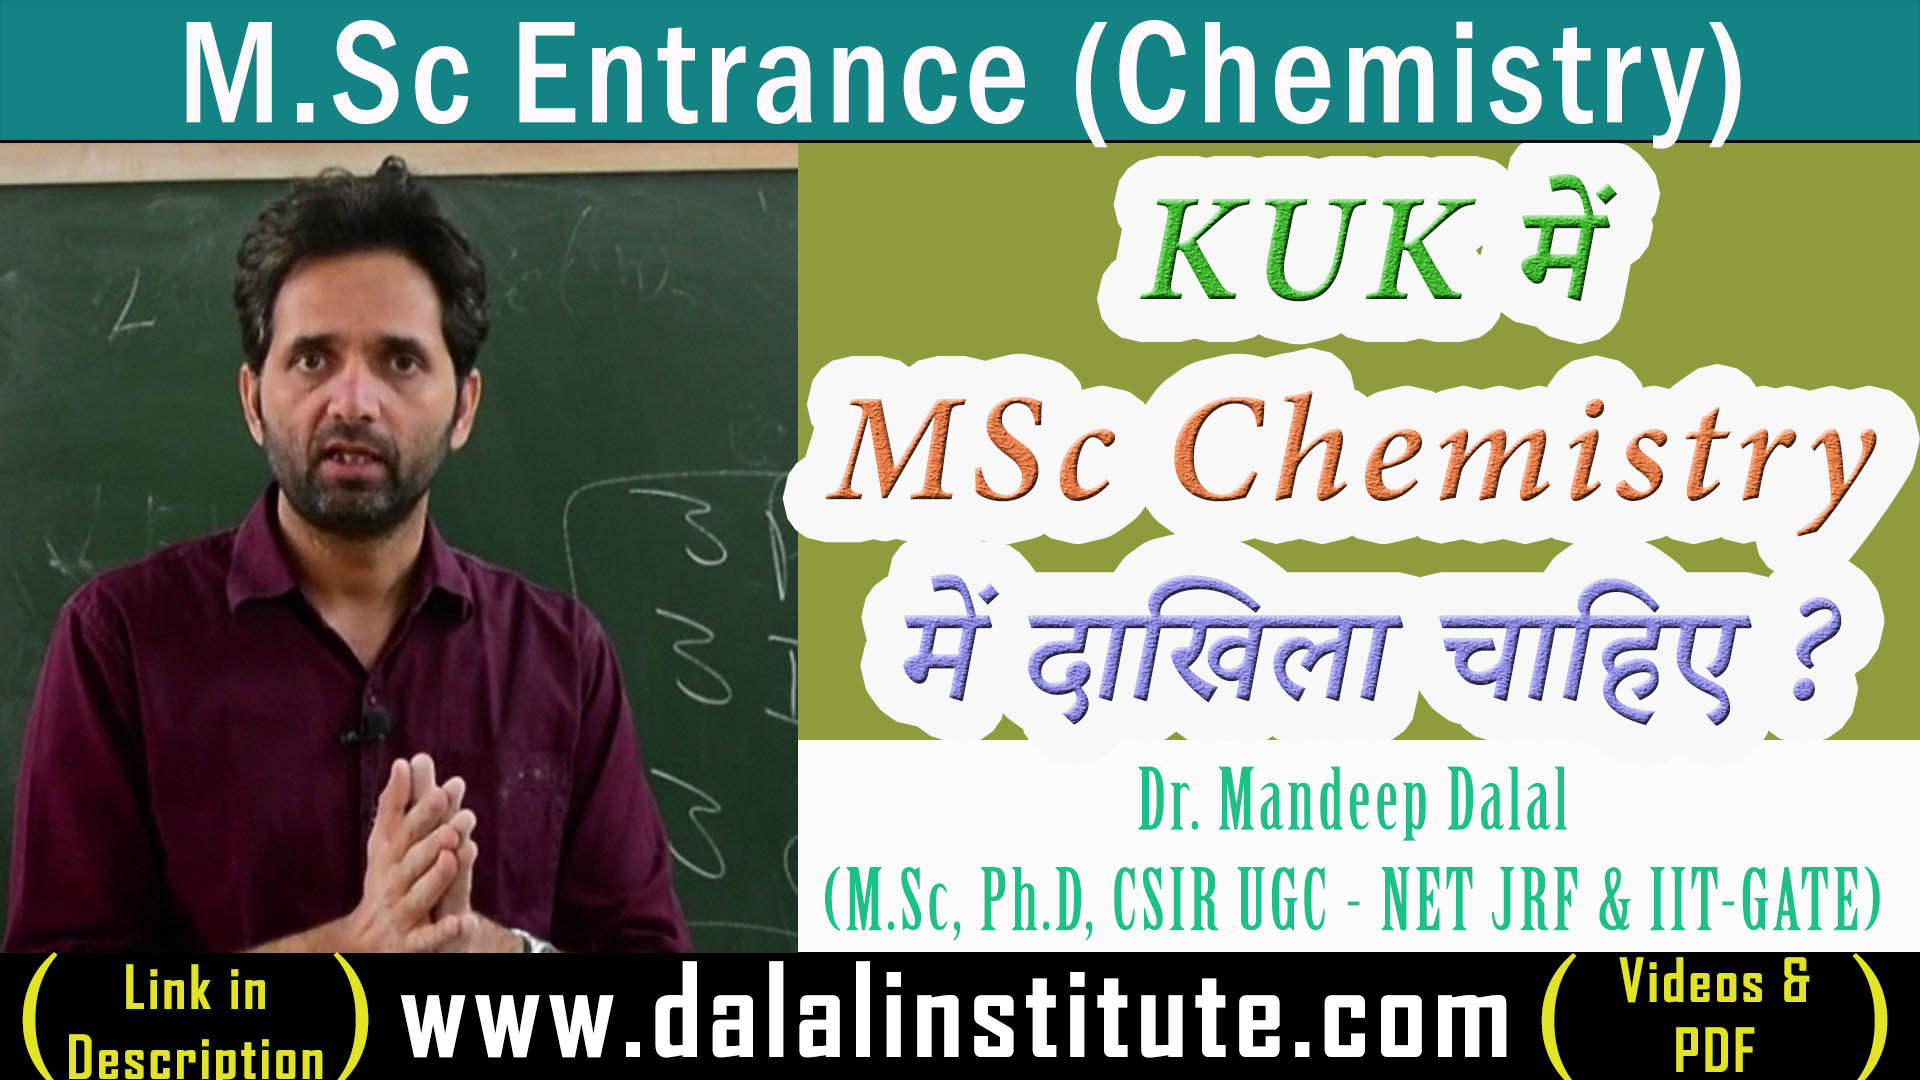 You are currently viewing M.Sc Chemistry Entrance Exam Kurukshetra University (KUK) – Notification, Syllabus, Coaching, Admission and Question Papers